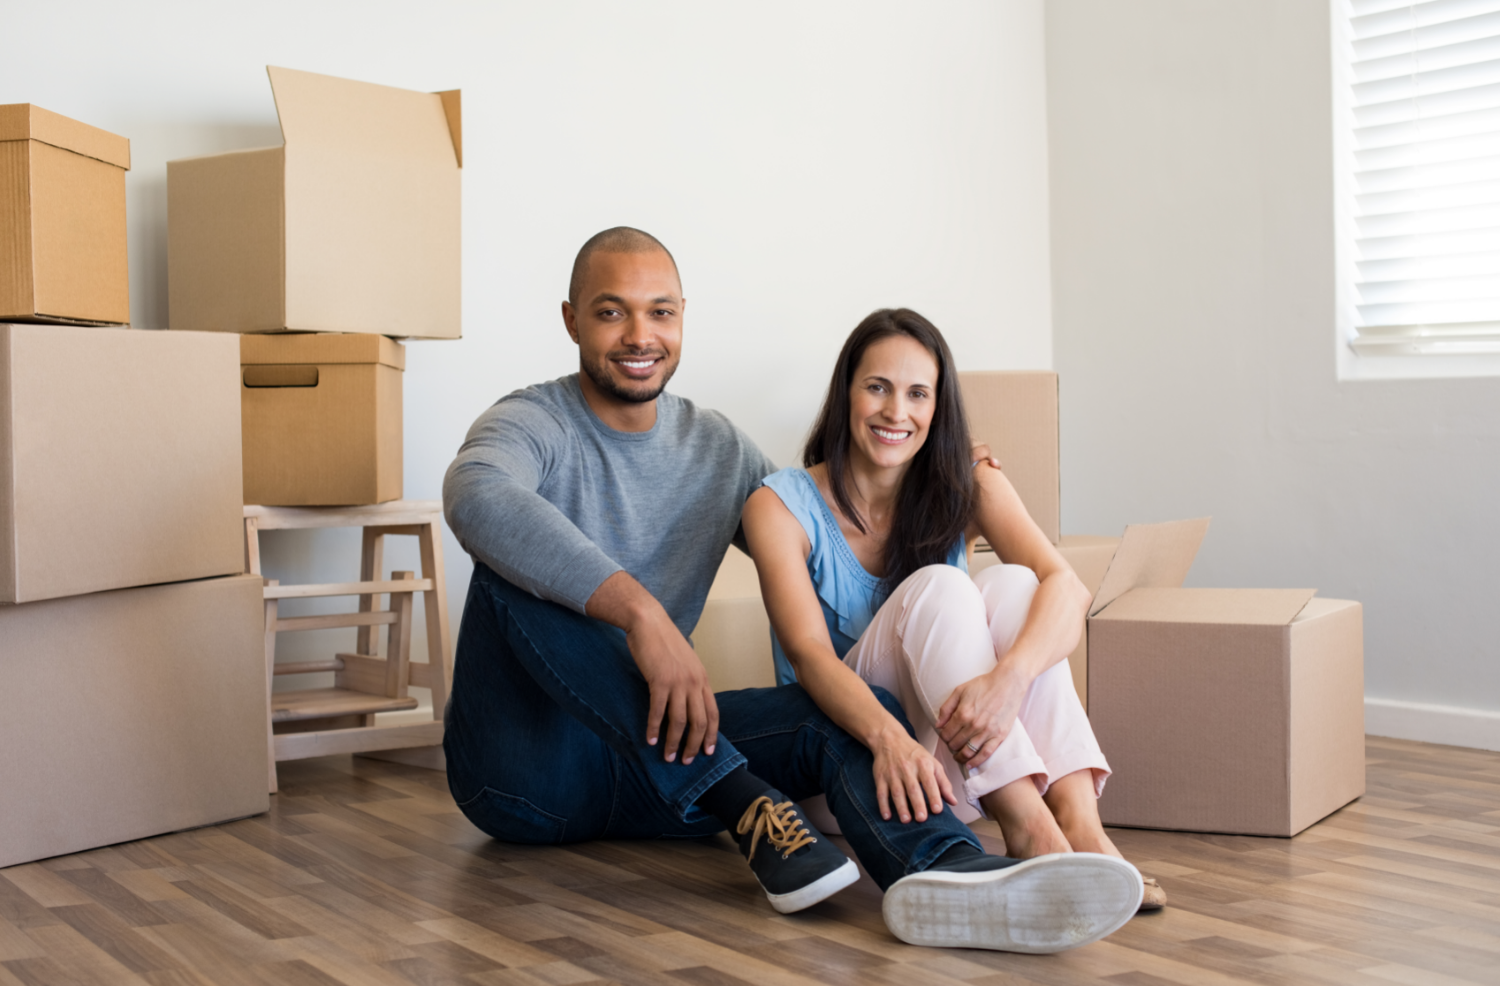 Oakland County Home Lender Gives Checklist for Michigan First Time Buyers